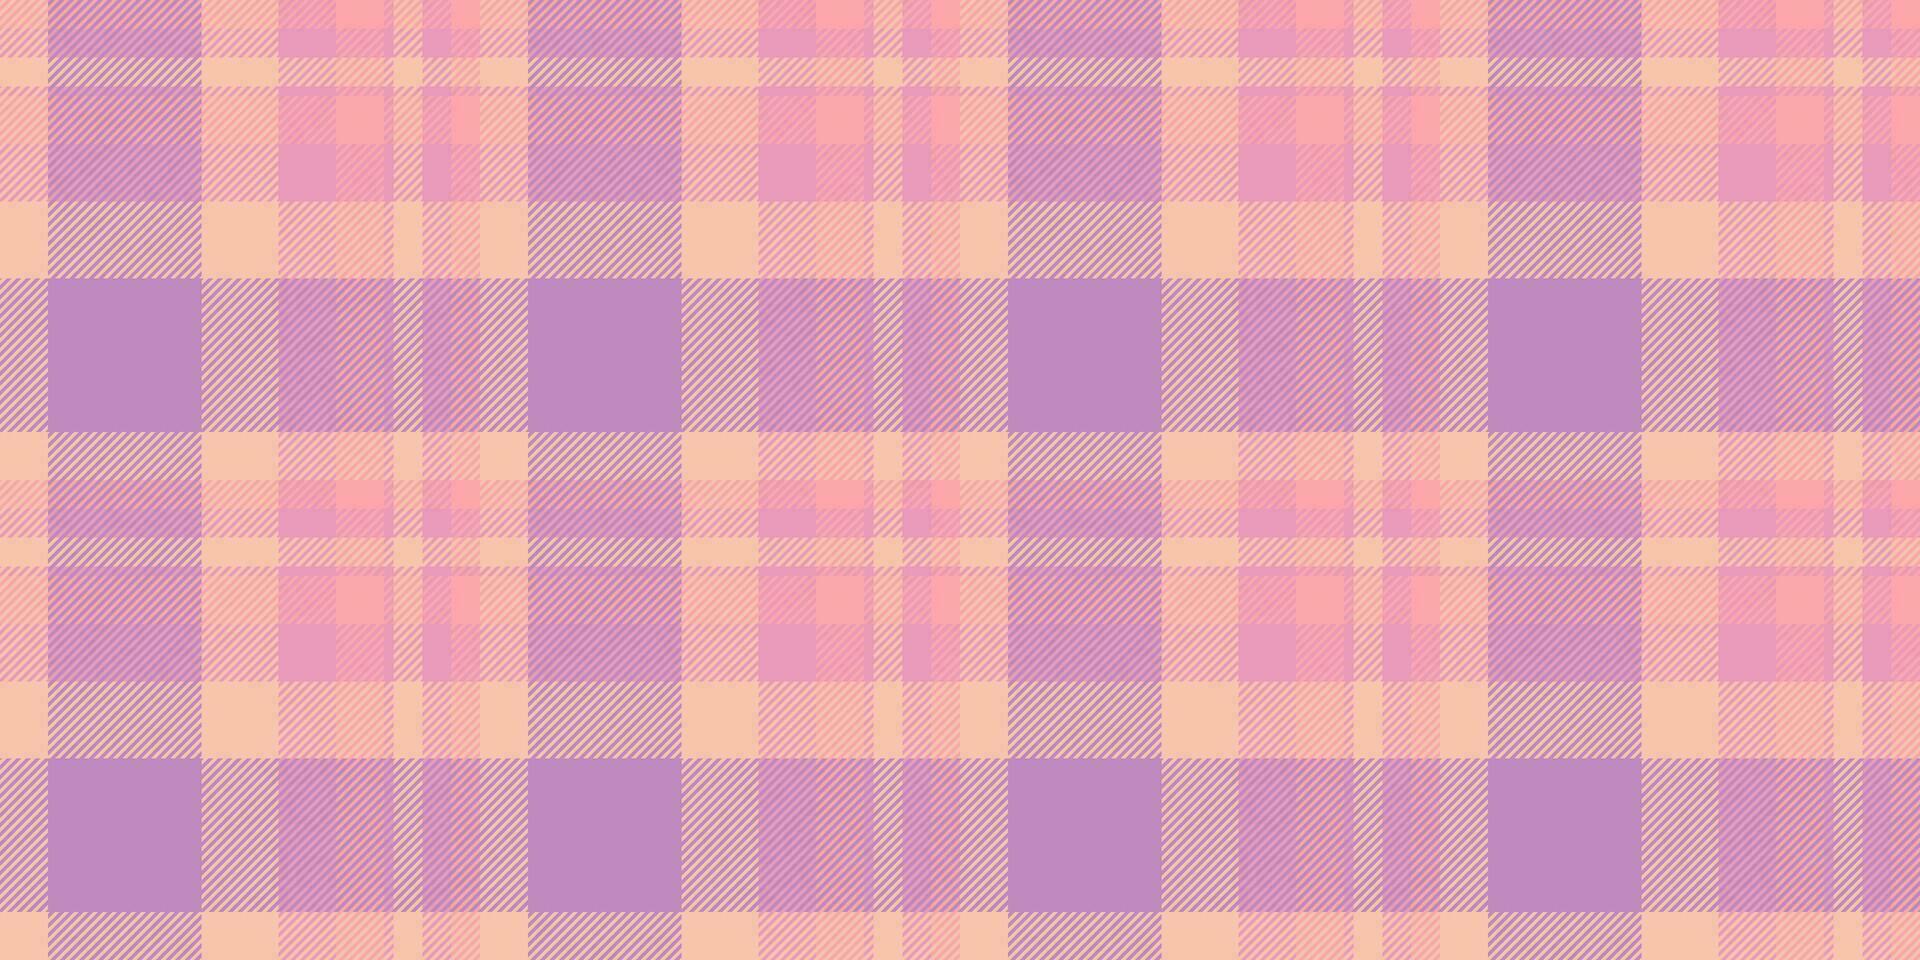 Hanukkah pattern texture textile, british fabric plaid seamless. Single background check tartan vector in light and pastel colors.